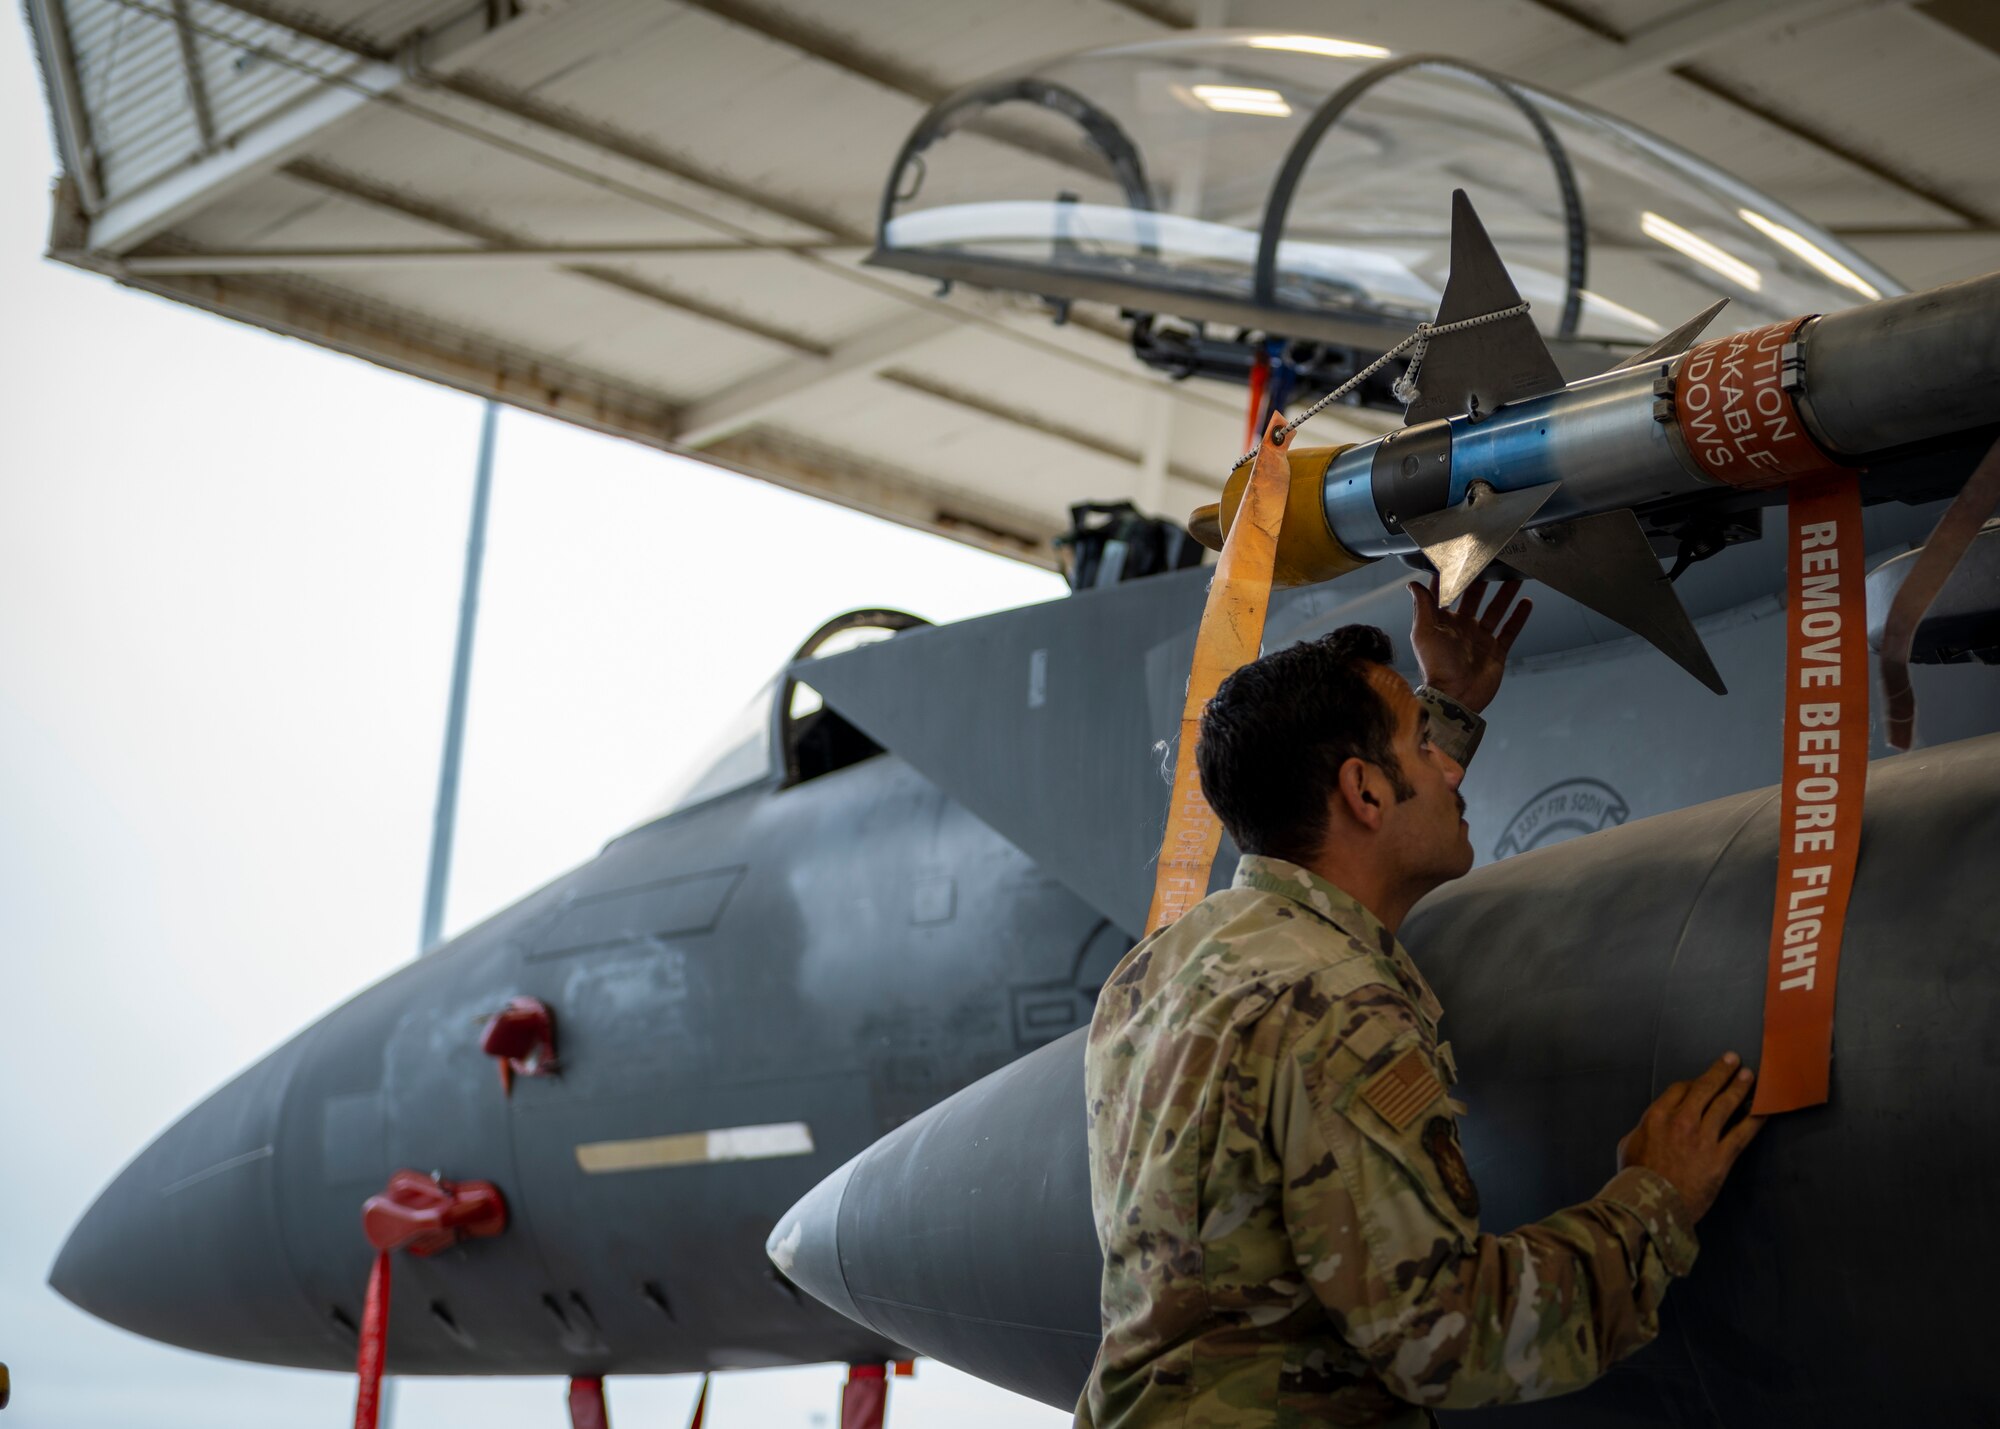 Airman 1st Class Carlos Santini, 333rd Fighter Generation Squadron load crew technician, inspects an AIM-9 Sidewinder missile mounted onto an F-15E Strike Eagle at Seymour Johnson Air Force Base, Oct. 12, 2021.